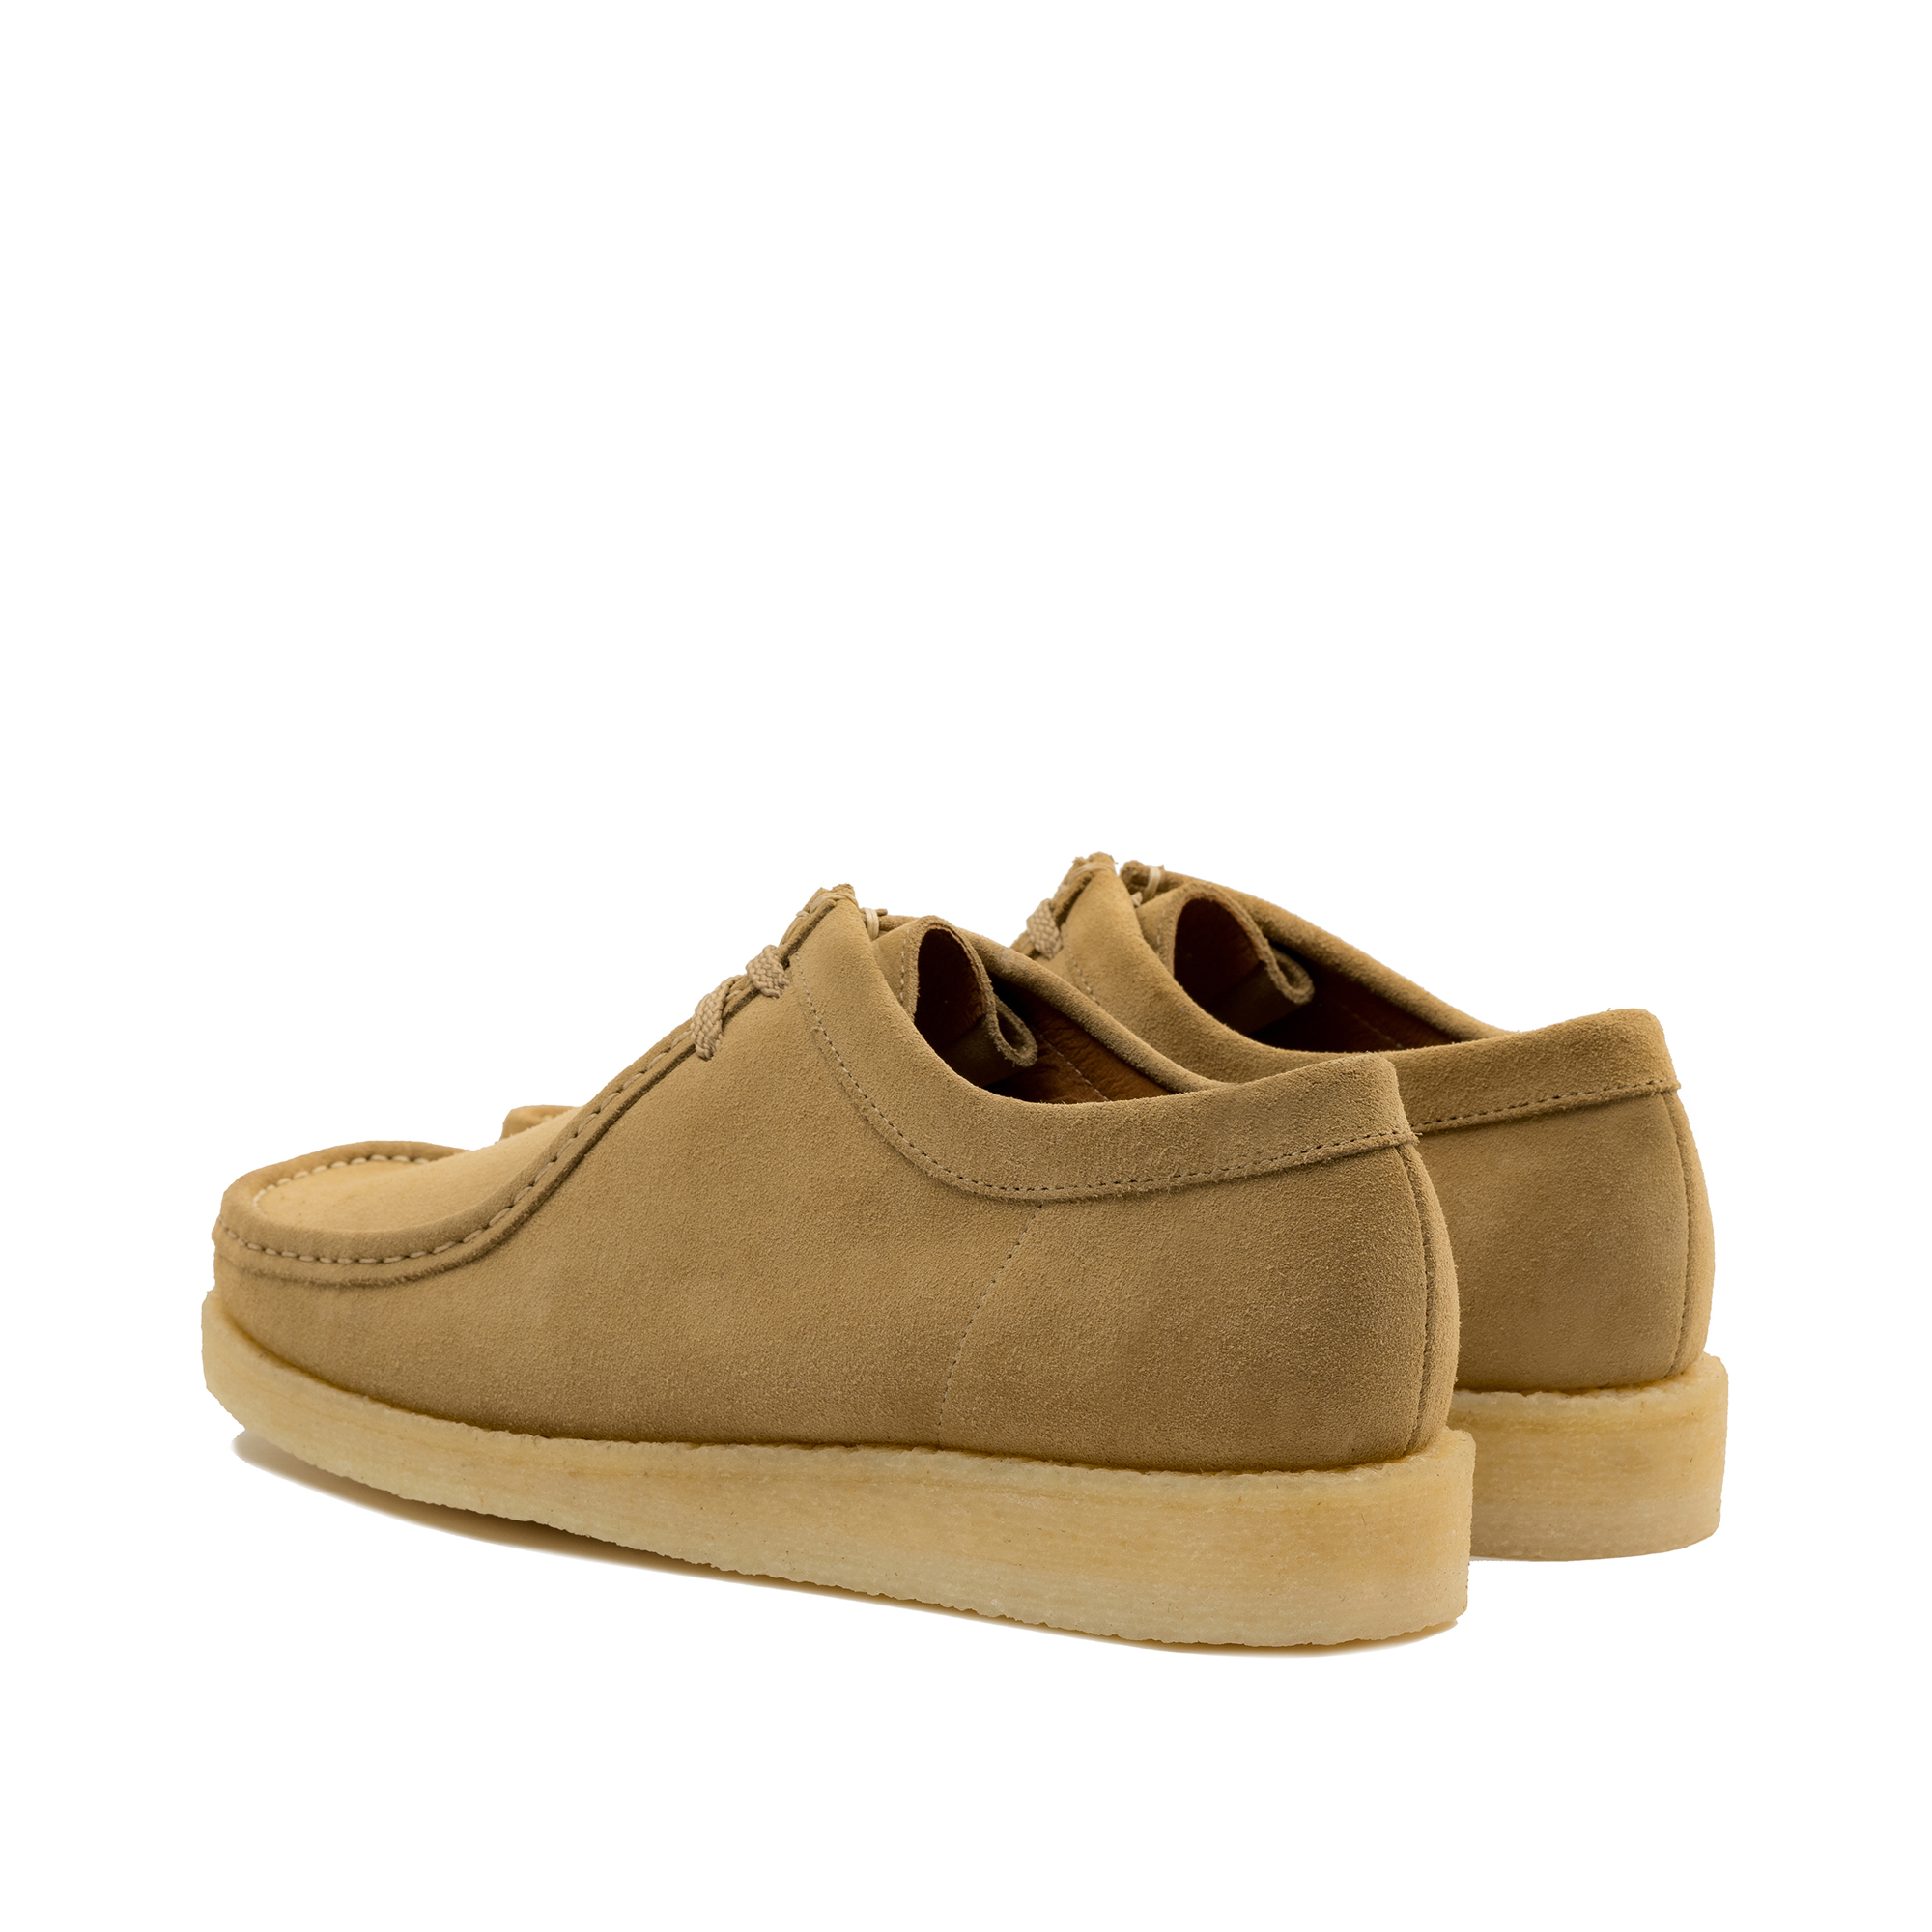 Padmore & Barnes Willow Low Suede UK9 - モカシン